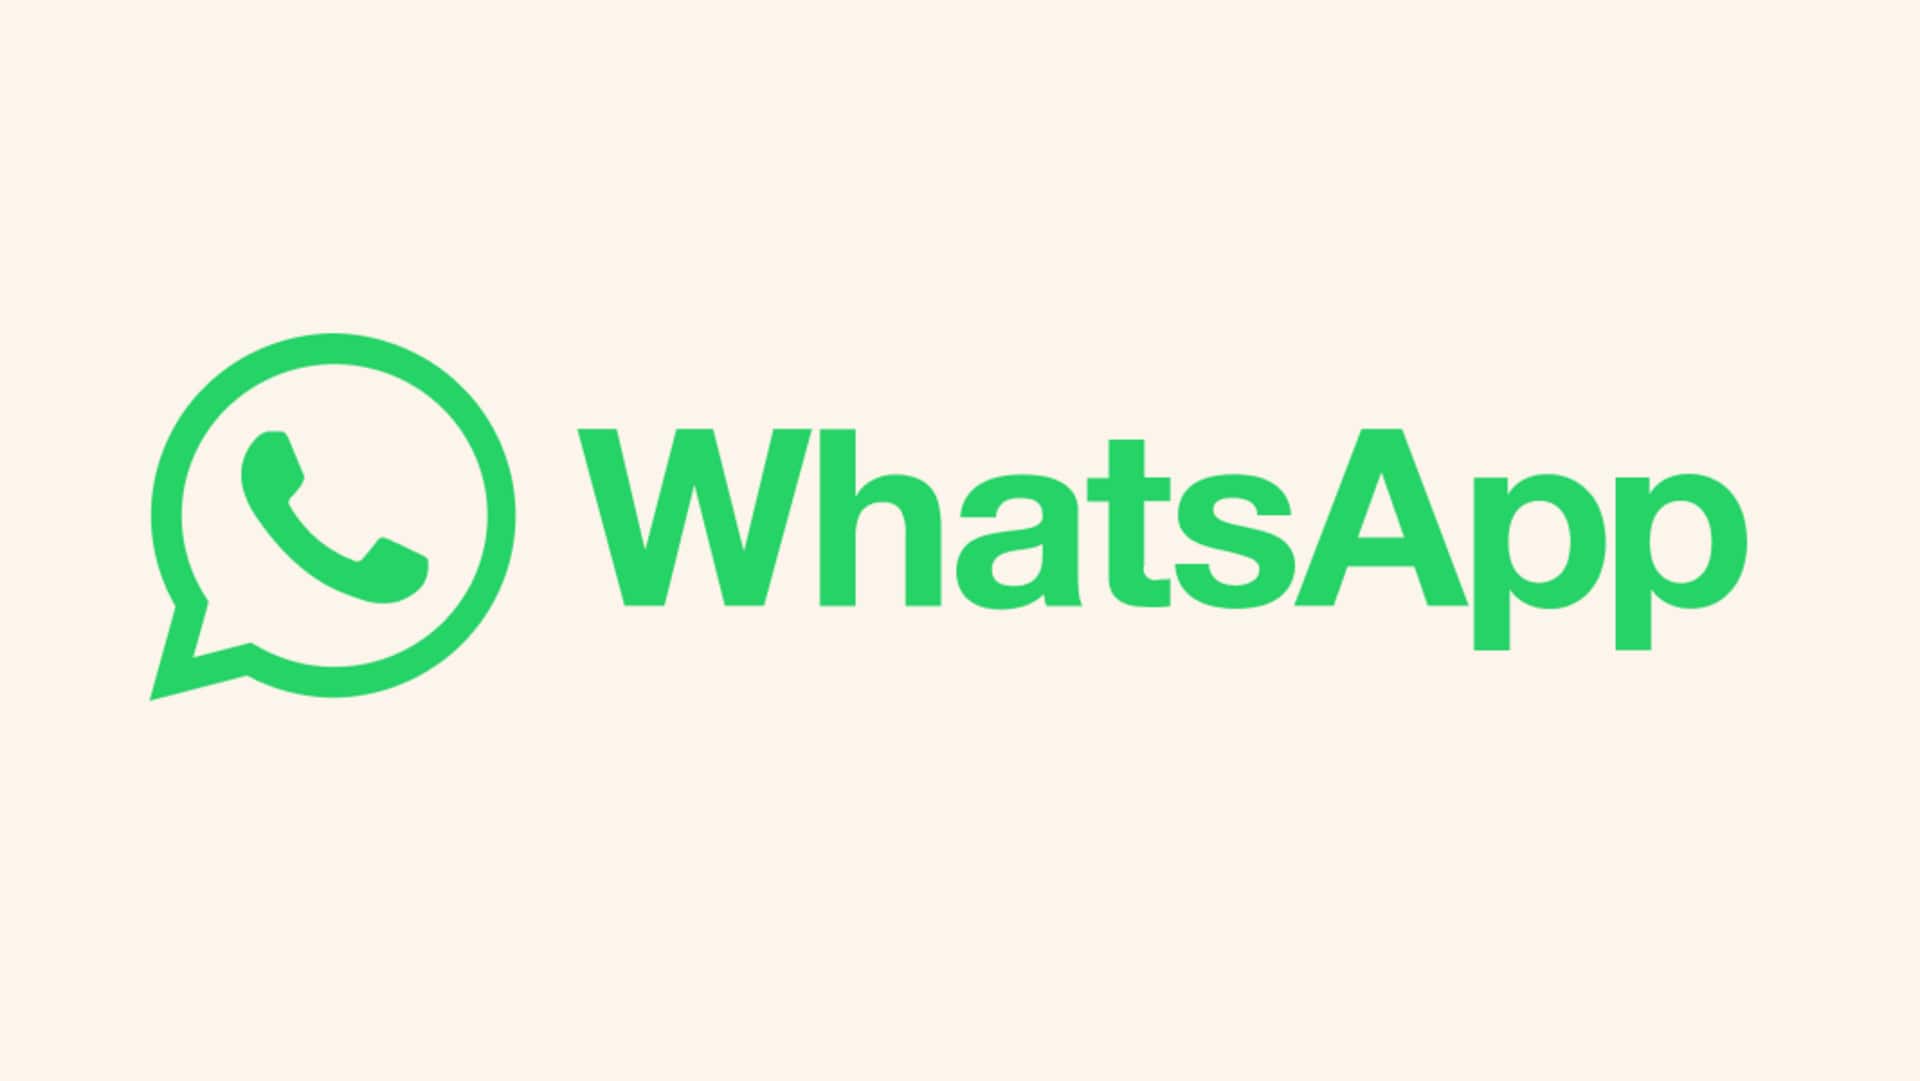 New WhatsApp features: Animated avatars, simplified chat list, and more